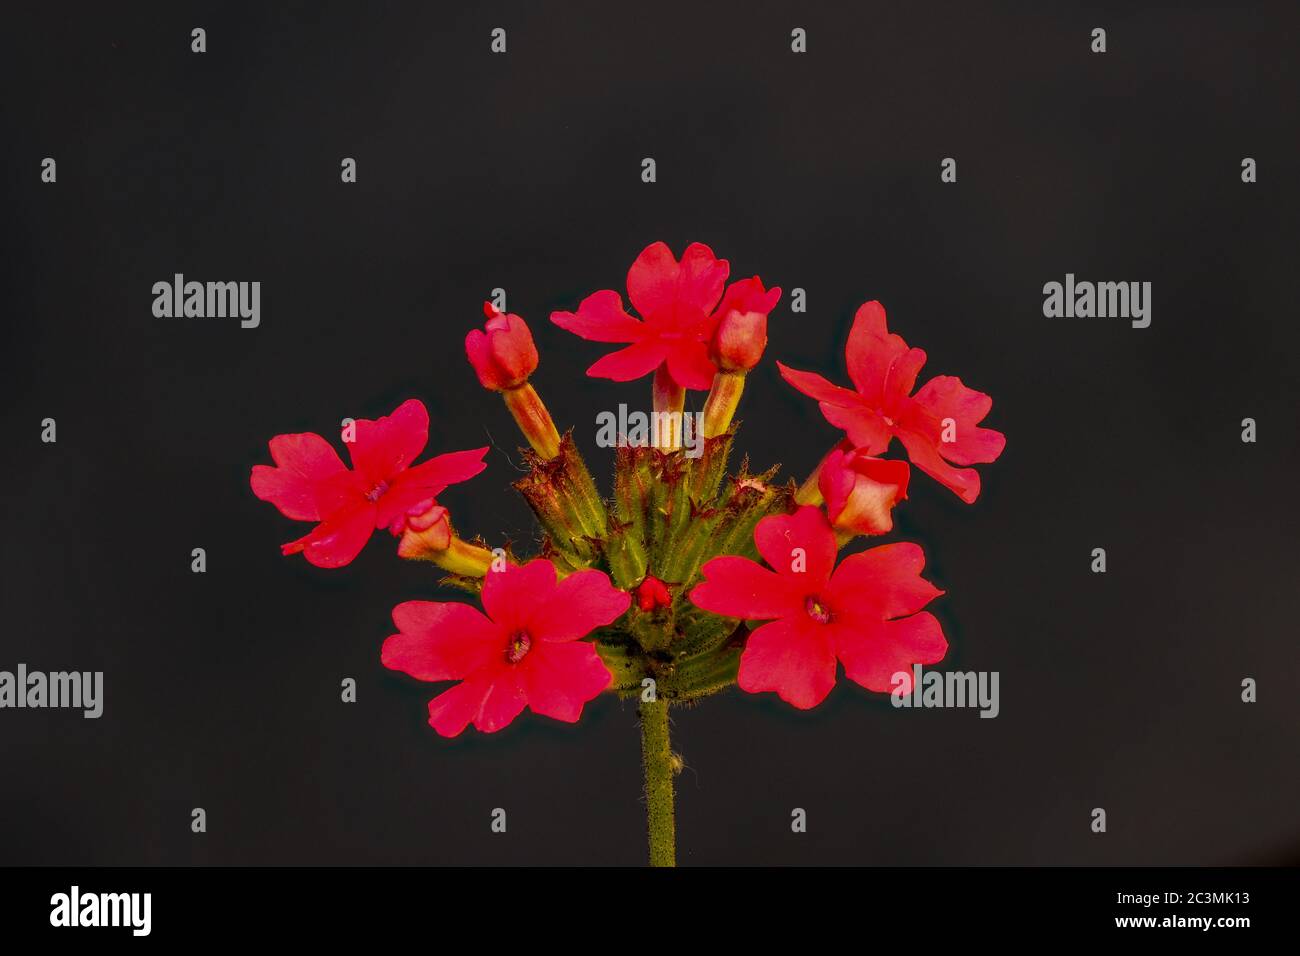 Close-up of argentinian verbena blossom against dark background Stock Photo